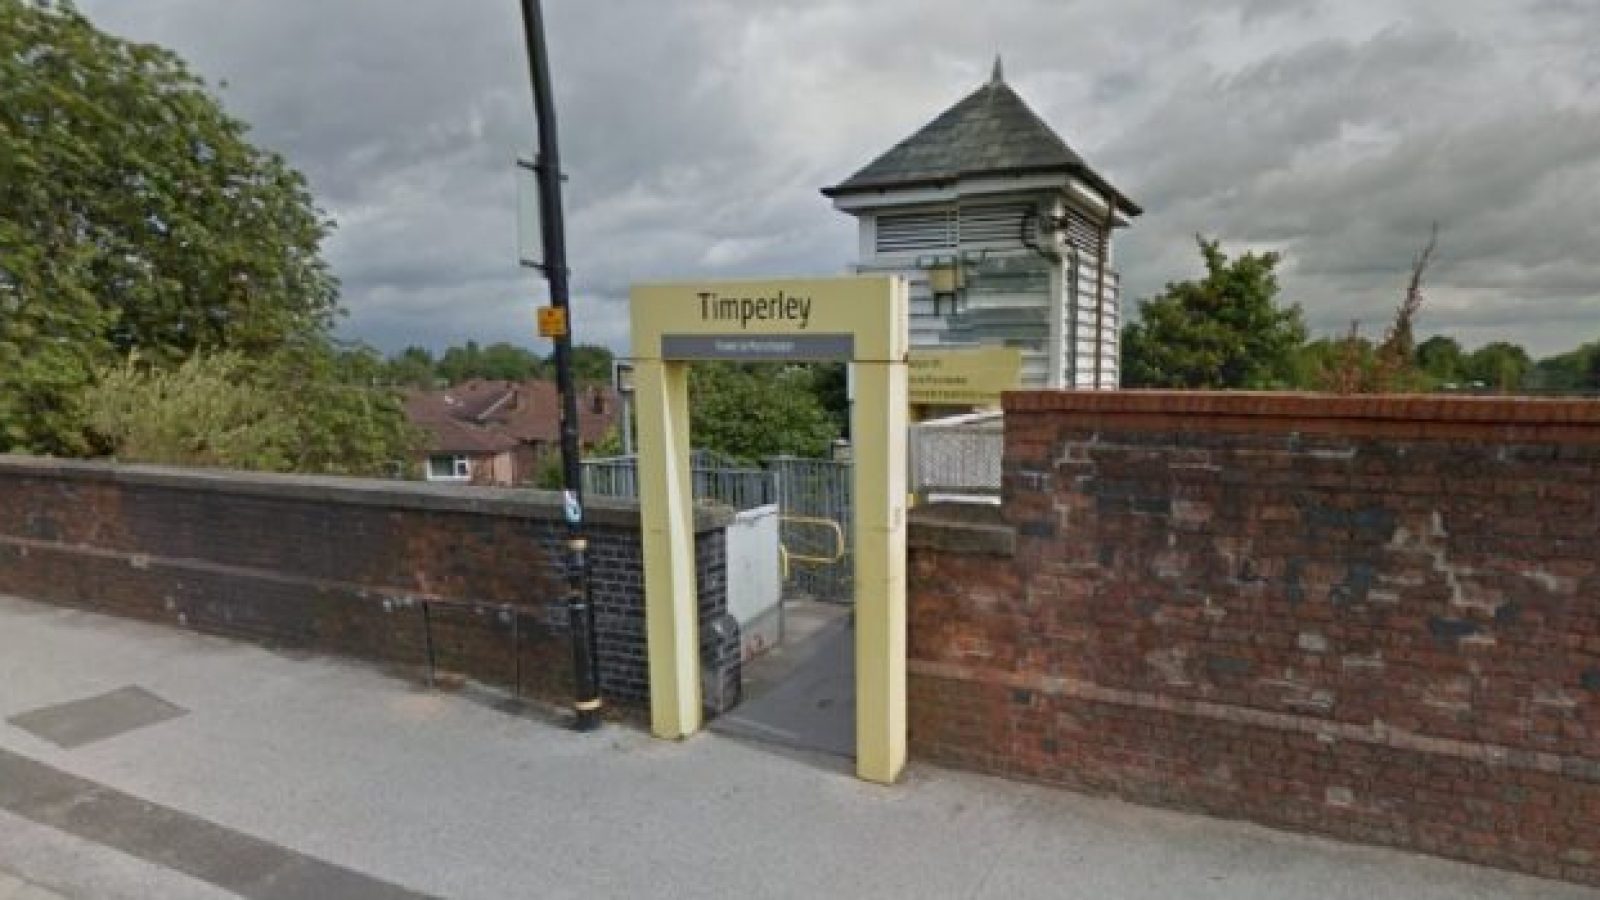 Timperley Metrolink where the boy was found by emergency services